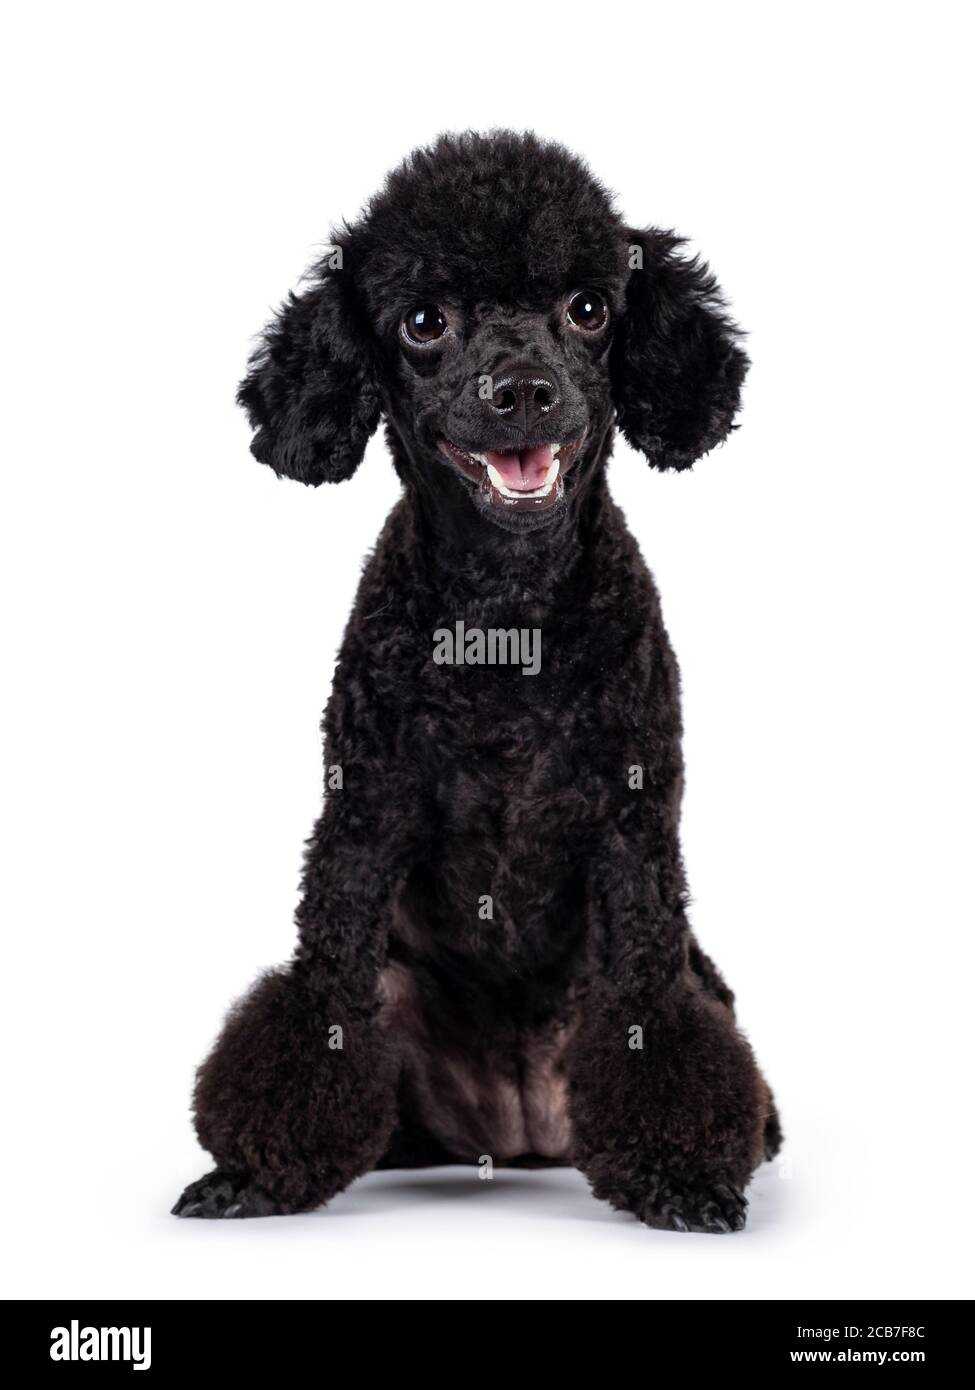 Cute black miniature poodle dog, sitting up facing front. Looking straight to camera. Isolated on white background. Mouth open. Stock Photo